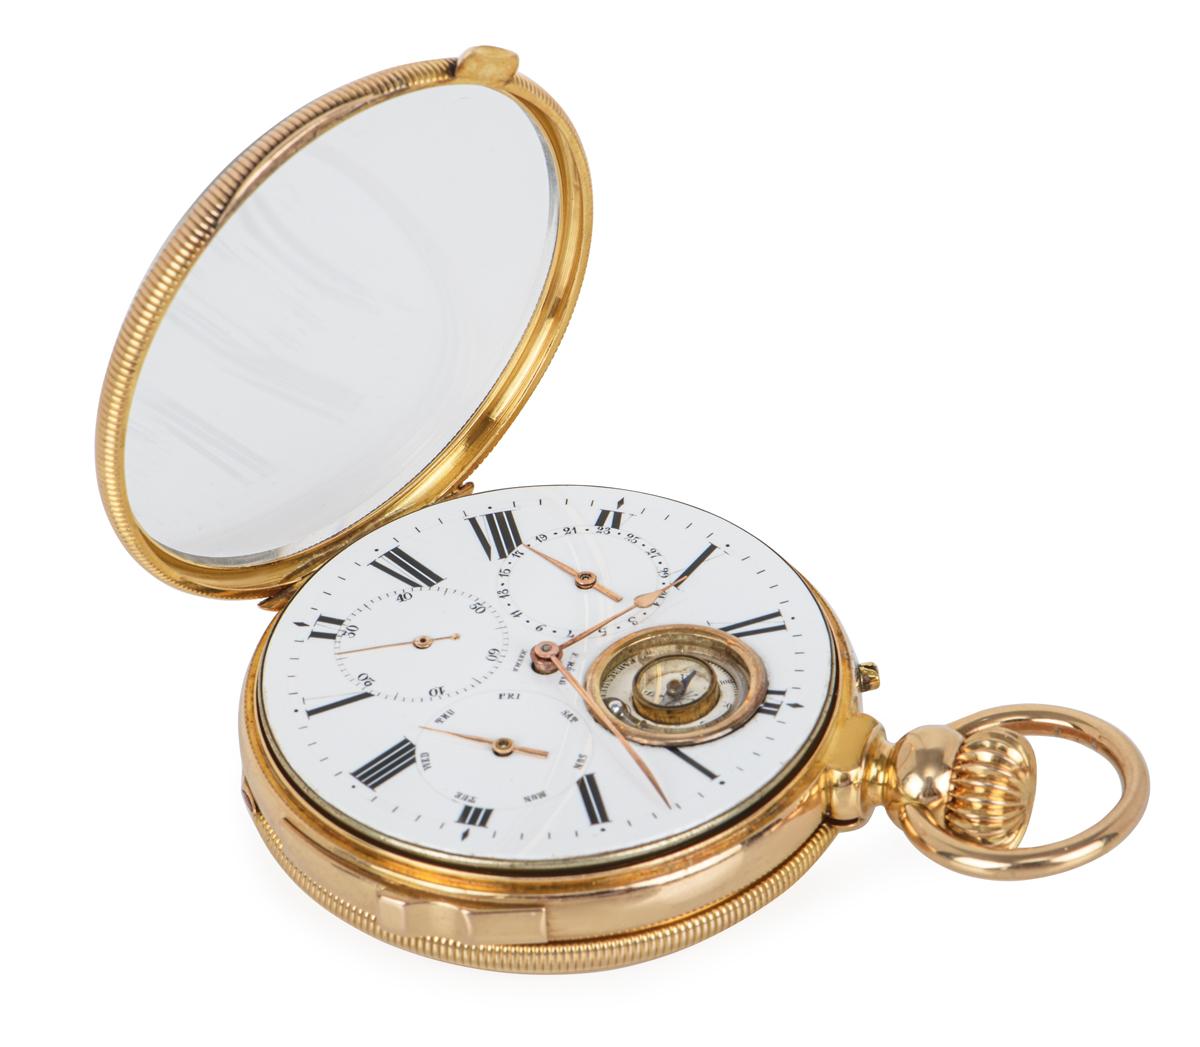 F.Rotig Havre 18Kt Rose Gold and Enamel Keyless Quarter Repeating Calendar Open face  50mm Pocket watch with Compass and Thermometer C1880.

Dial: A beautiful white enamel dial Roman numerals outer minute ring with three subsidiary dials for date,